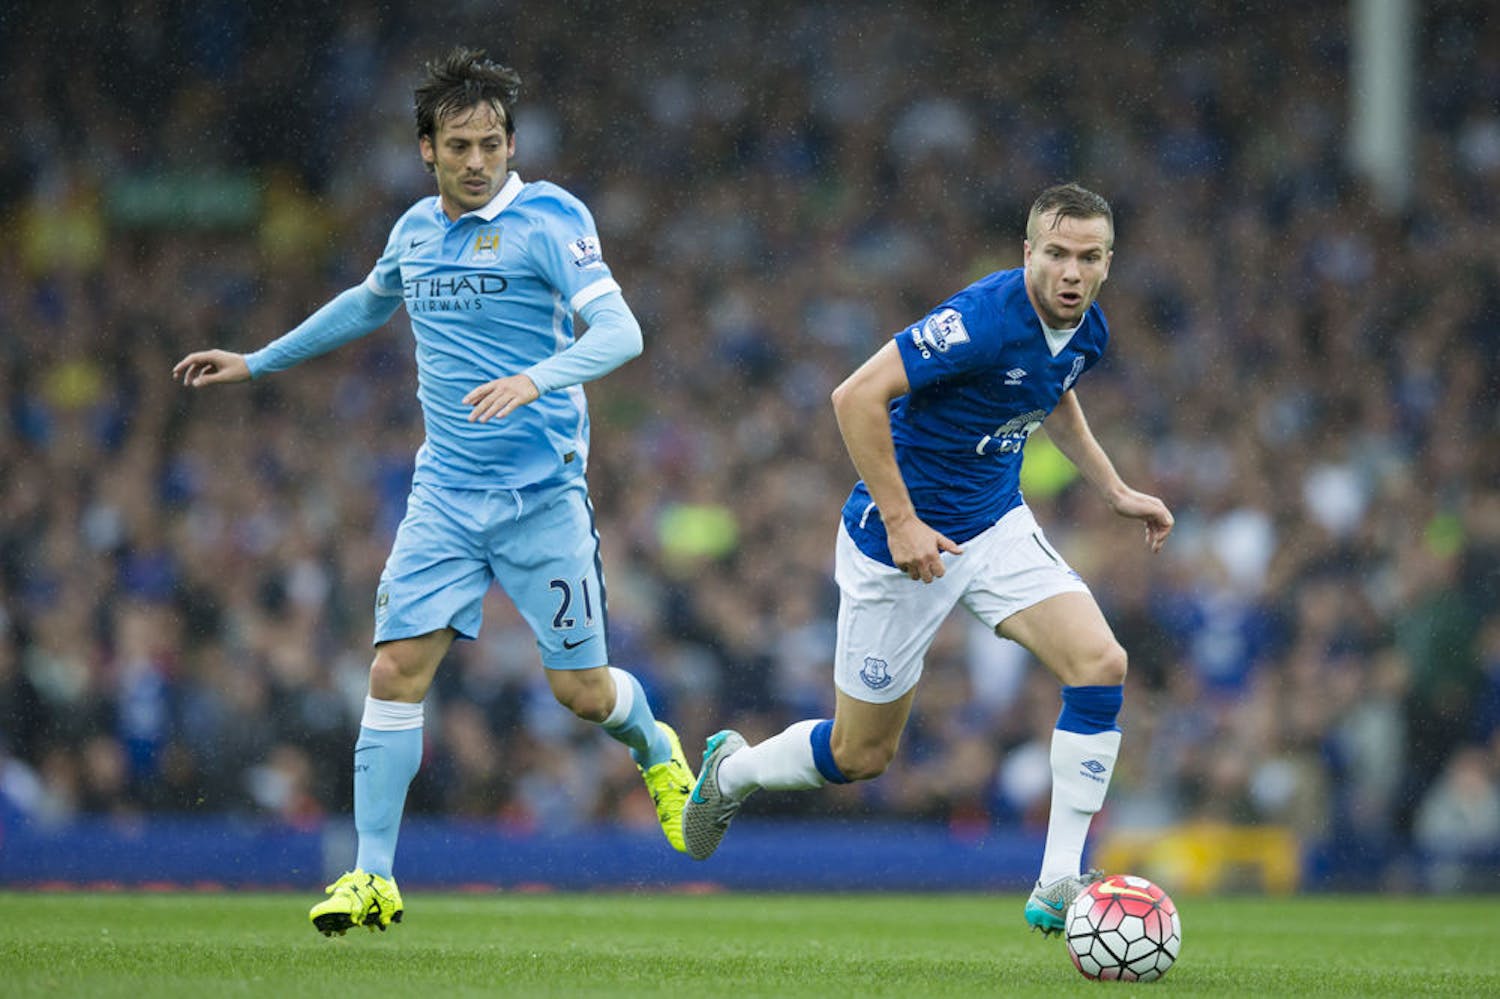 Everton's Tom Cleverley, right, fights for the ball against Manchester City's David Silva during the English Premier League soccer match between Everton and Manchester City at Goodison Park Stadium, Liverpool, England, Sunday Aug. 23, 2015. (AP Photo/Jon Super)